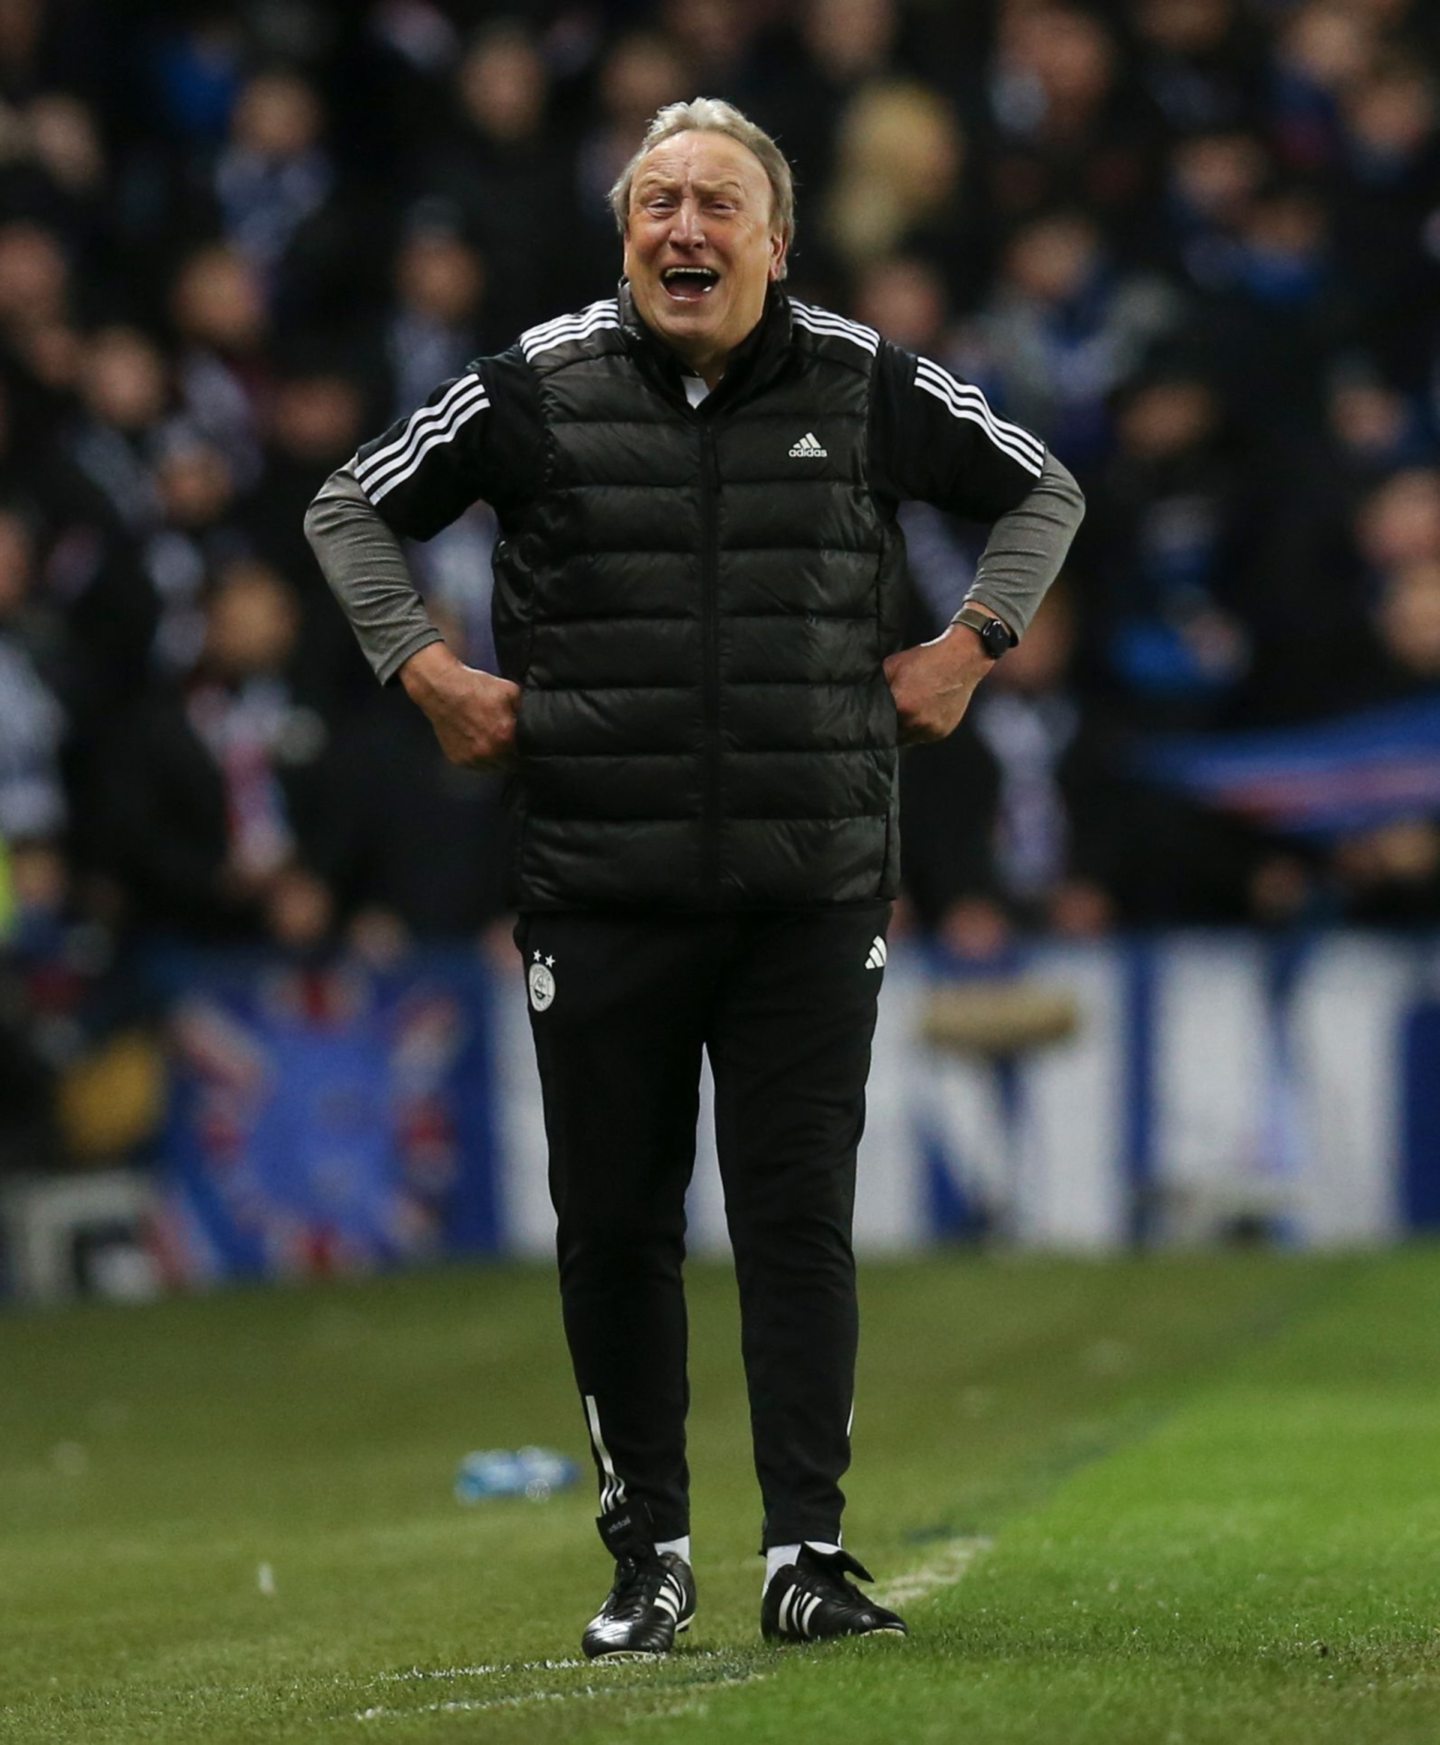 Aberdeen manager Neil Warnock reacts during the 2-1 loss to Rangers at Ibrox. Image: Shutterstock 